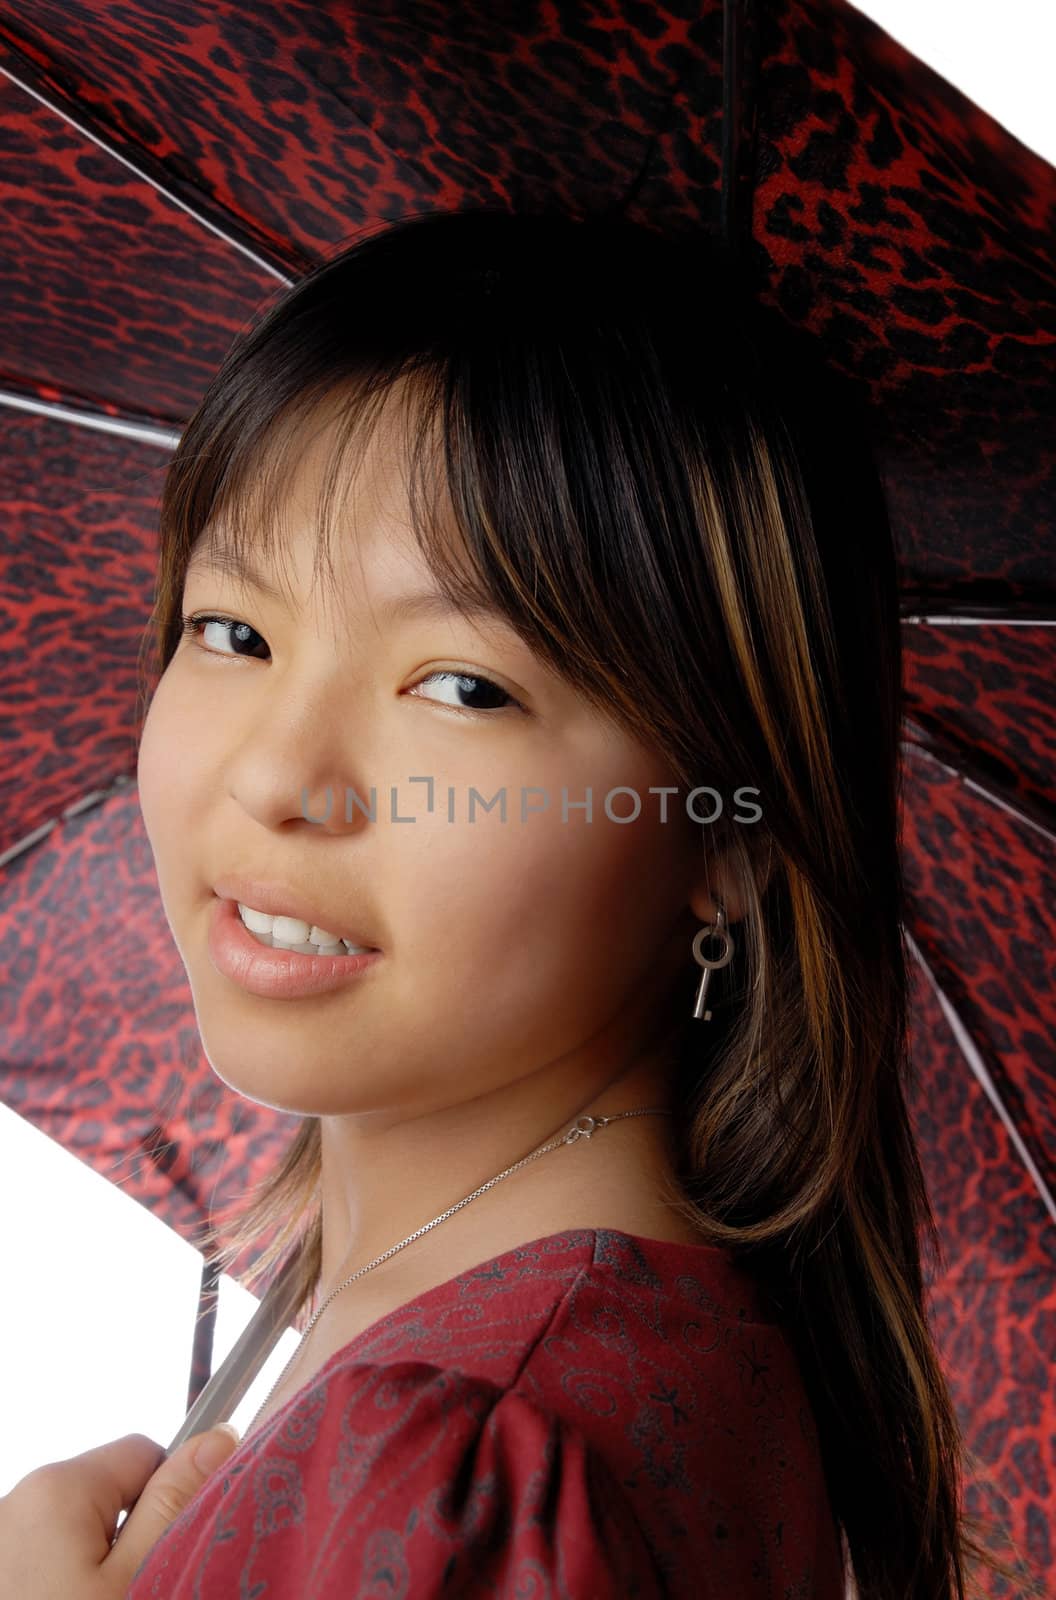 Photo of the young smiling model with umbrella